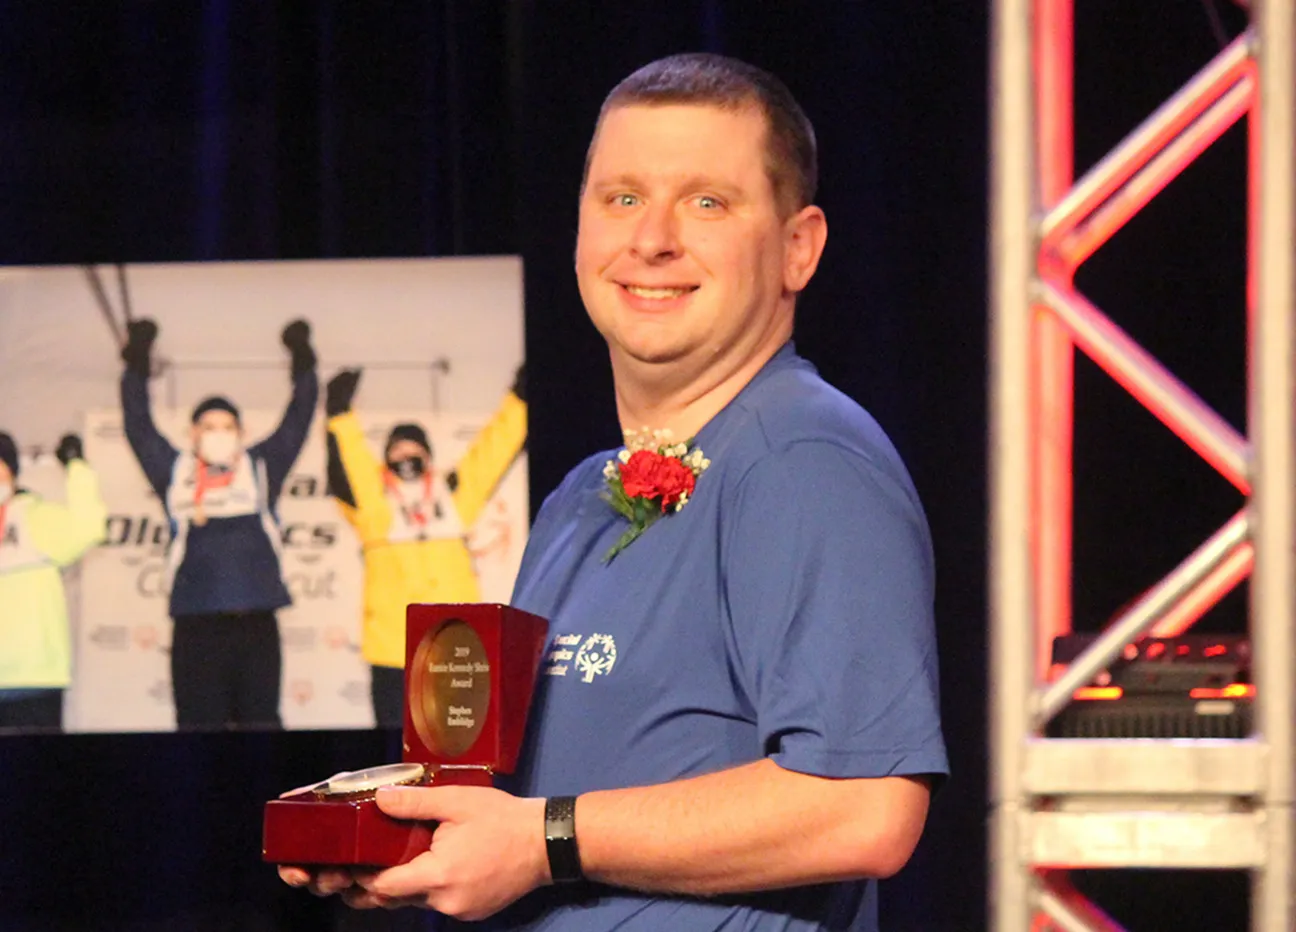 Male wearing a blue t-shirt smiling and holding an award.